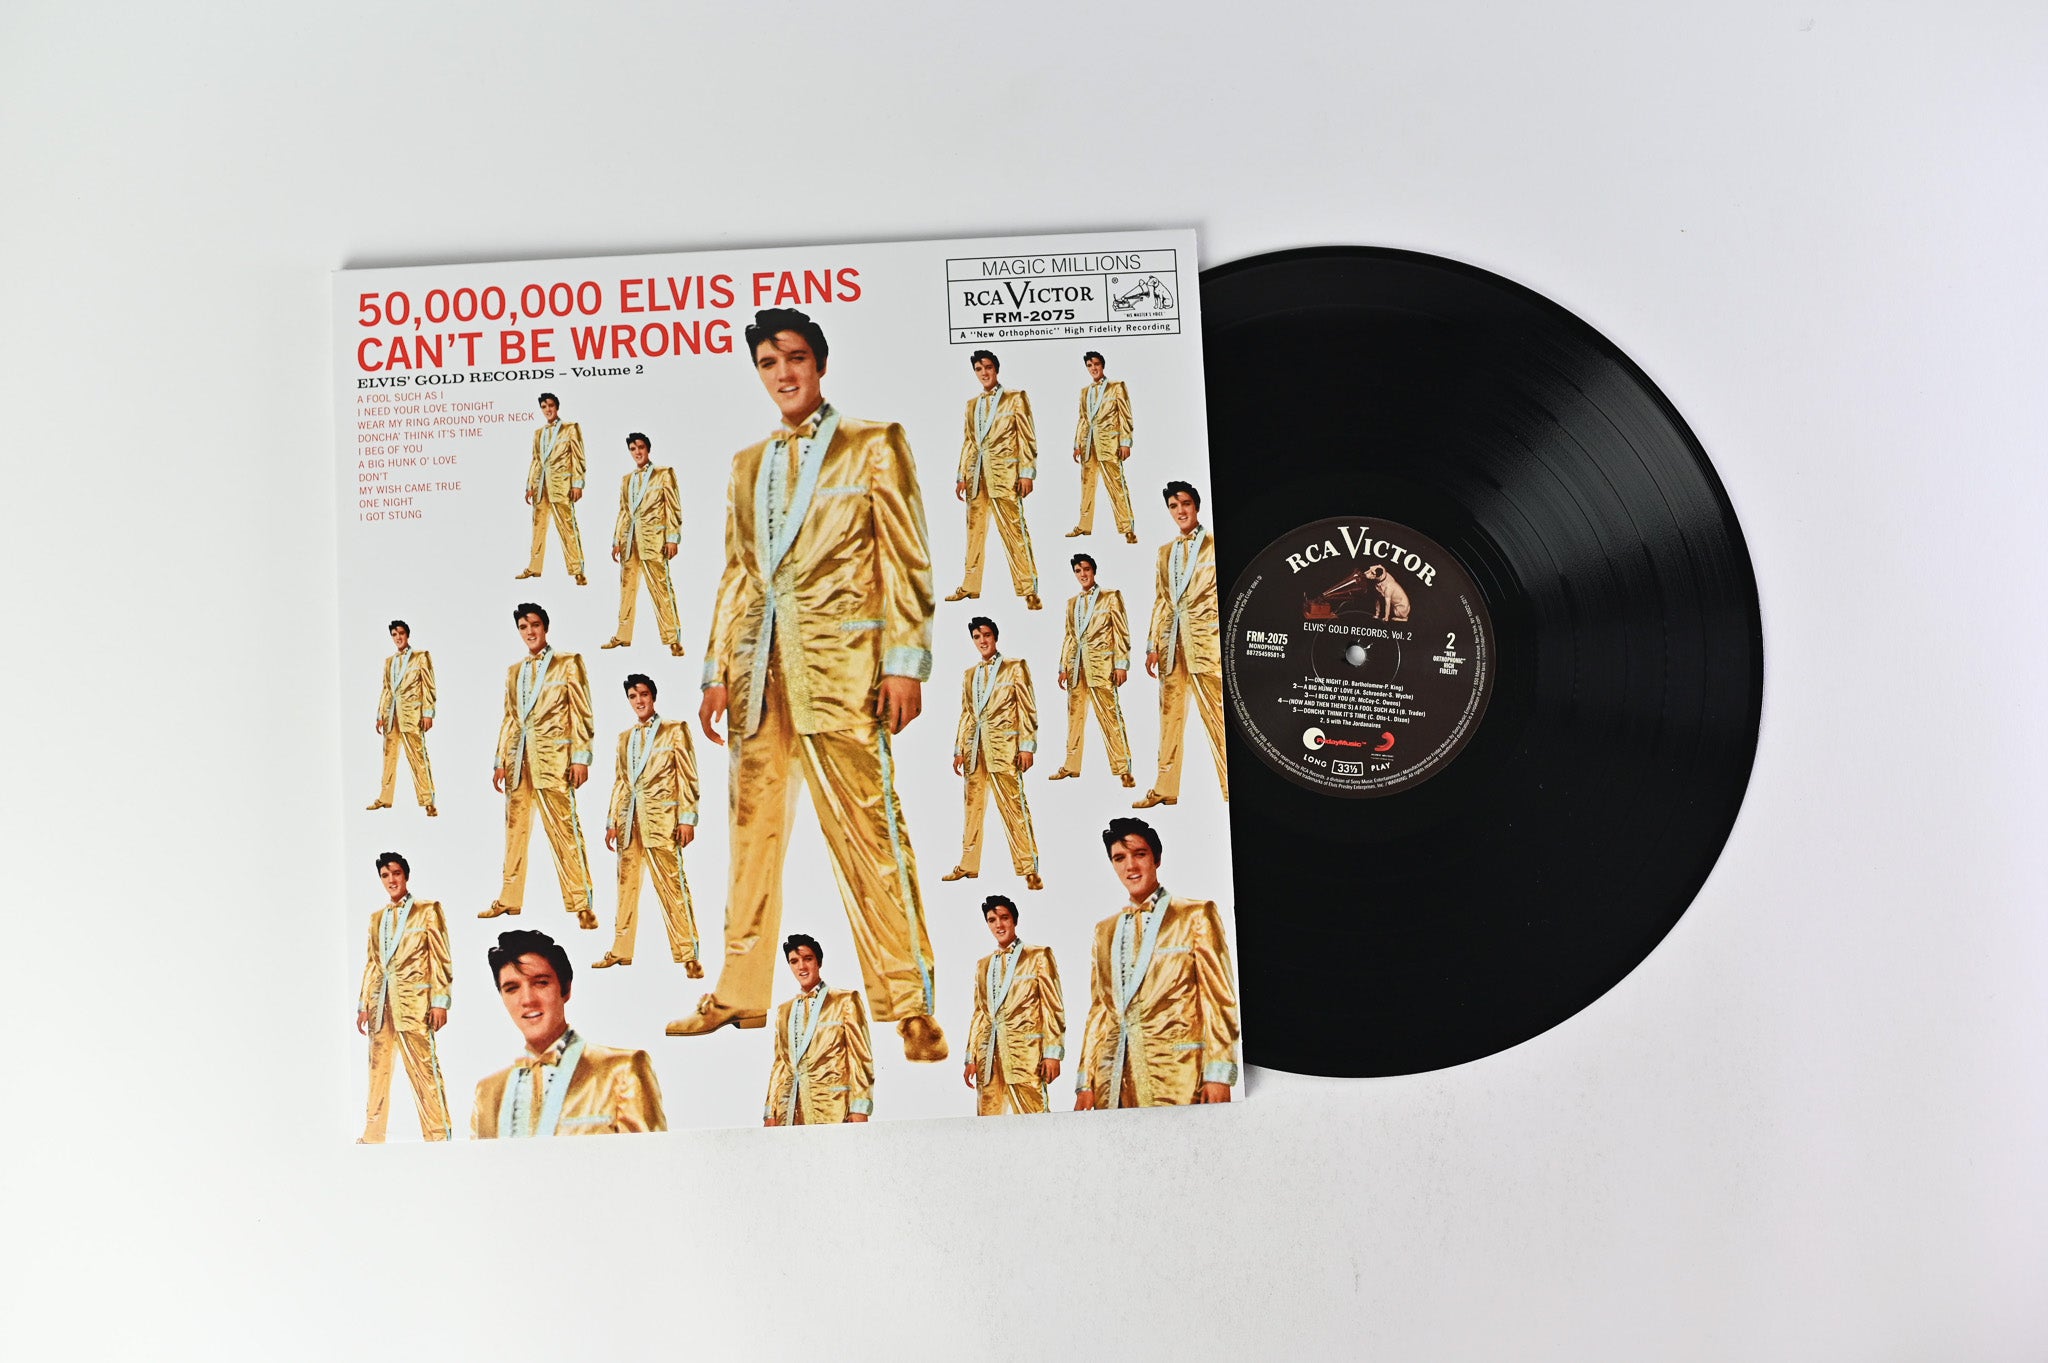 Elvis Presley - 50,000,000 Elvis Fans Can't Be Wrong (Elvis' Gold Records Vol. 2) on Friday Music